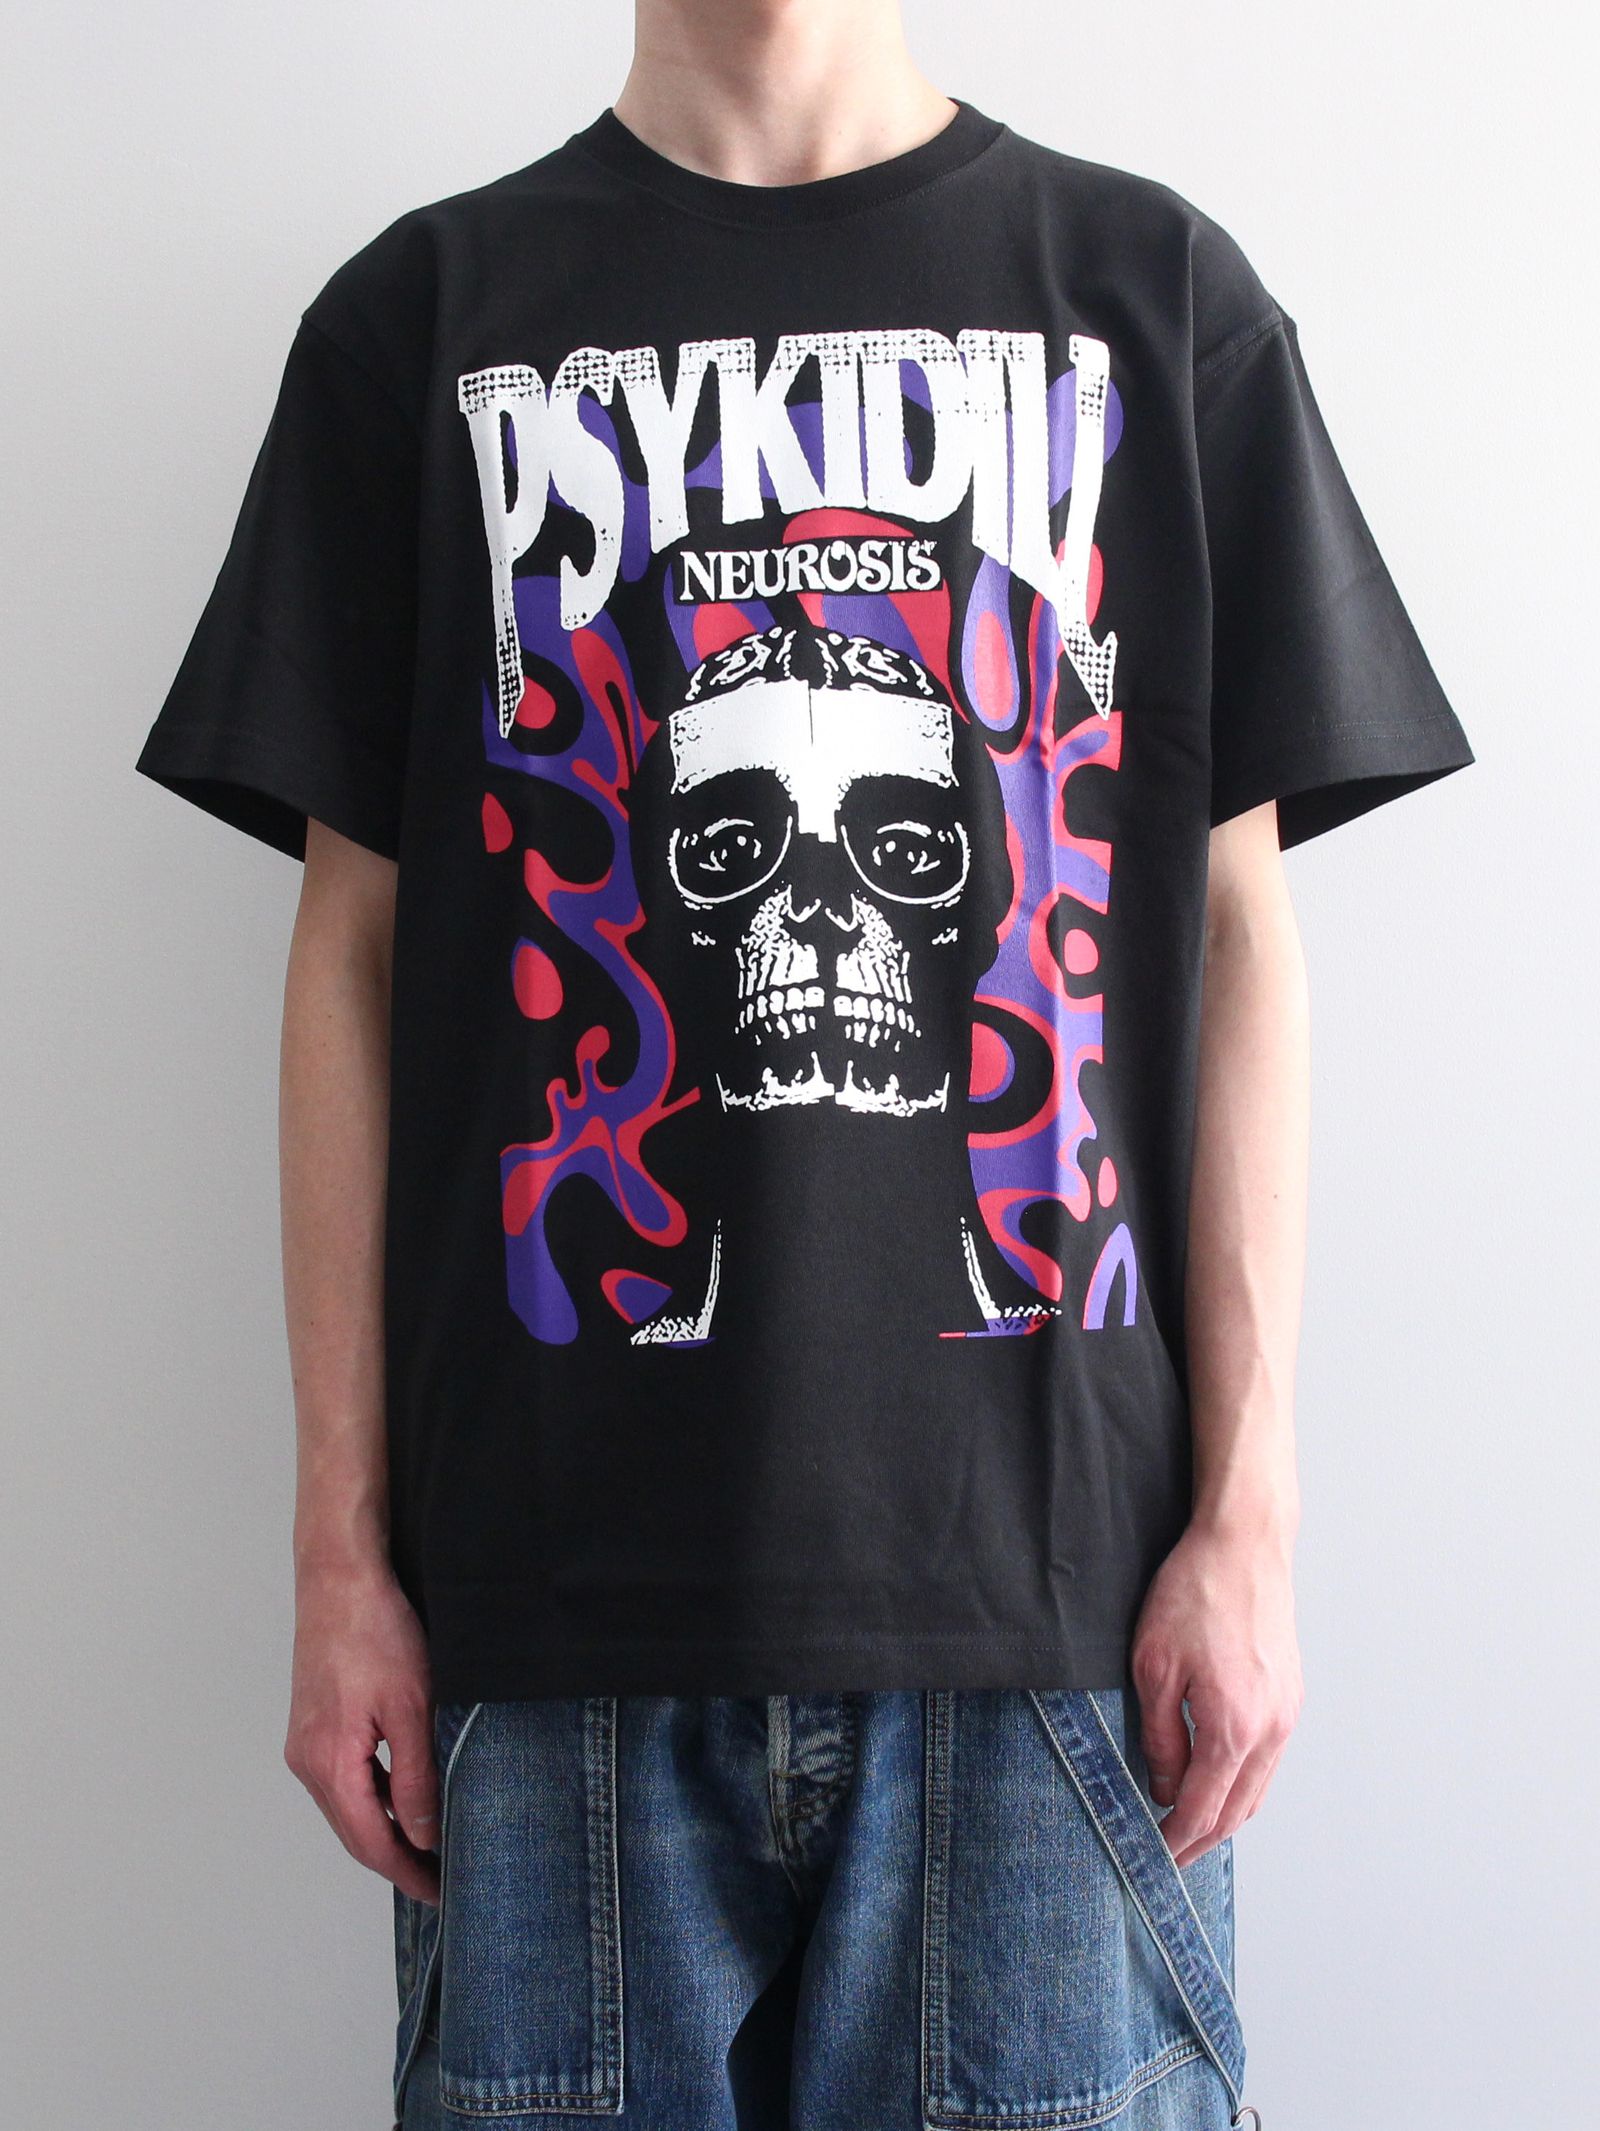 KIDILL - プリントTシャツ - COLLABORATION WITH TOM TOSSEYN 